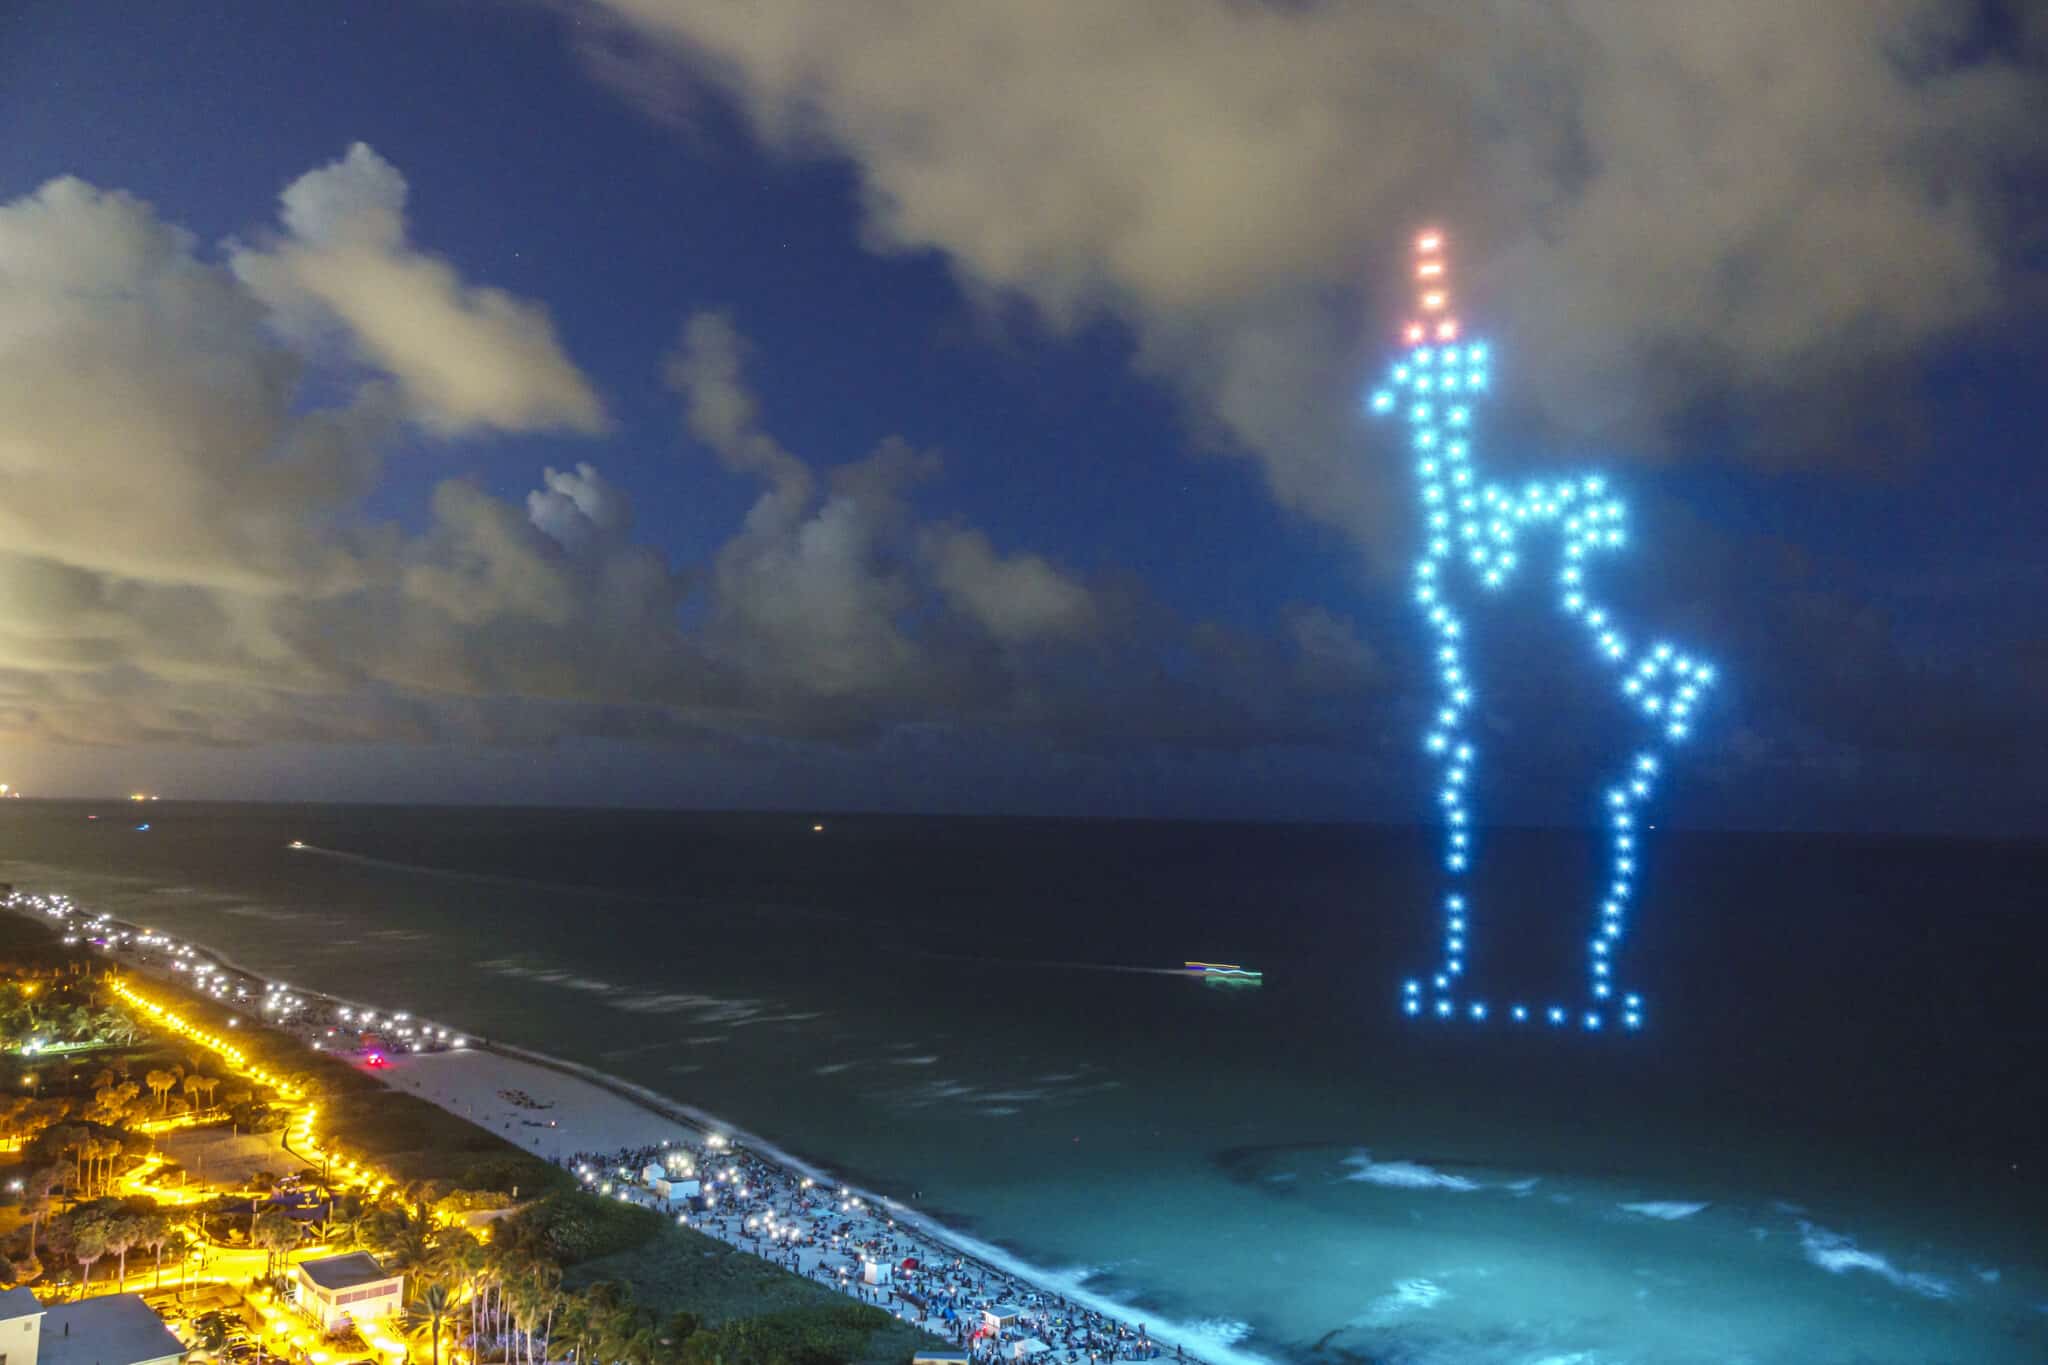 Miami Beach, Florida, Ocean Terrace, Fire on the Fourth, 4th of July Festival, drone light show featuring The Statue of Liberty